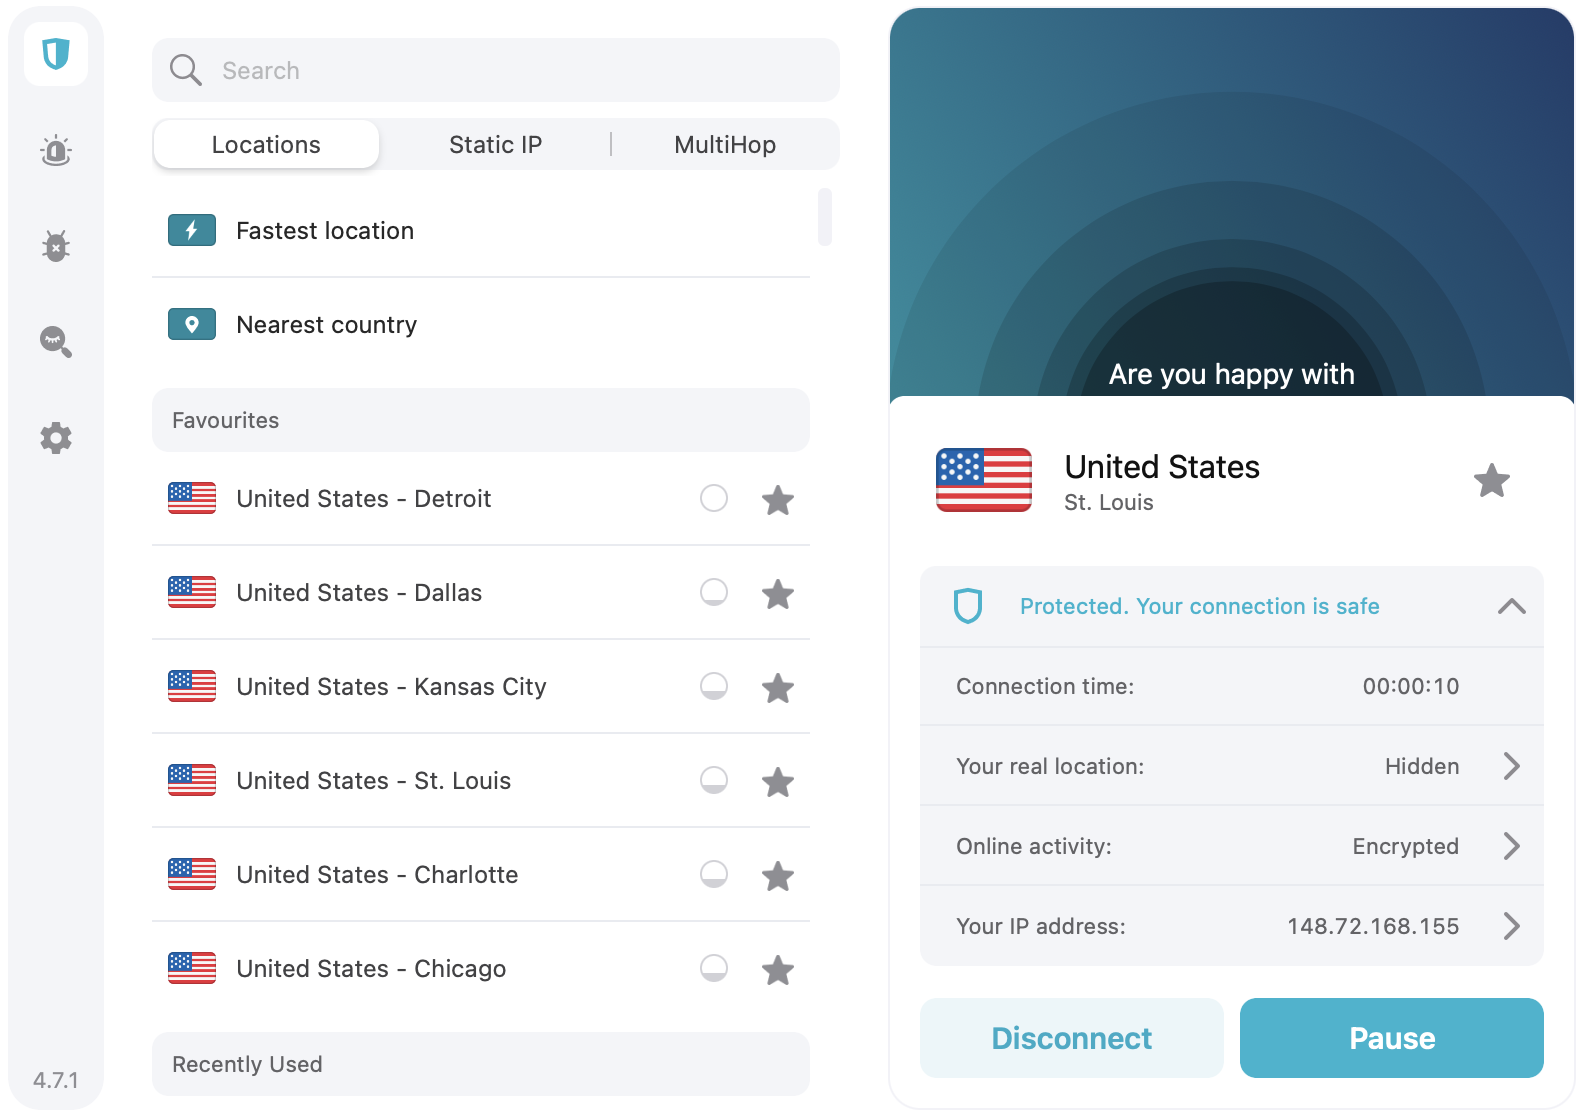 After installing Surfshark, launch the VPN app and connect to any US server.